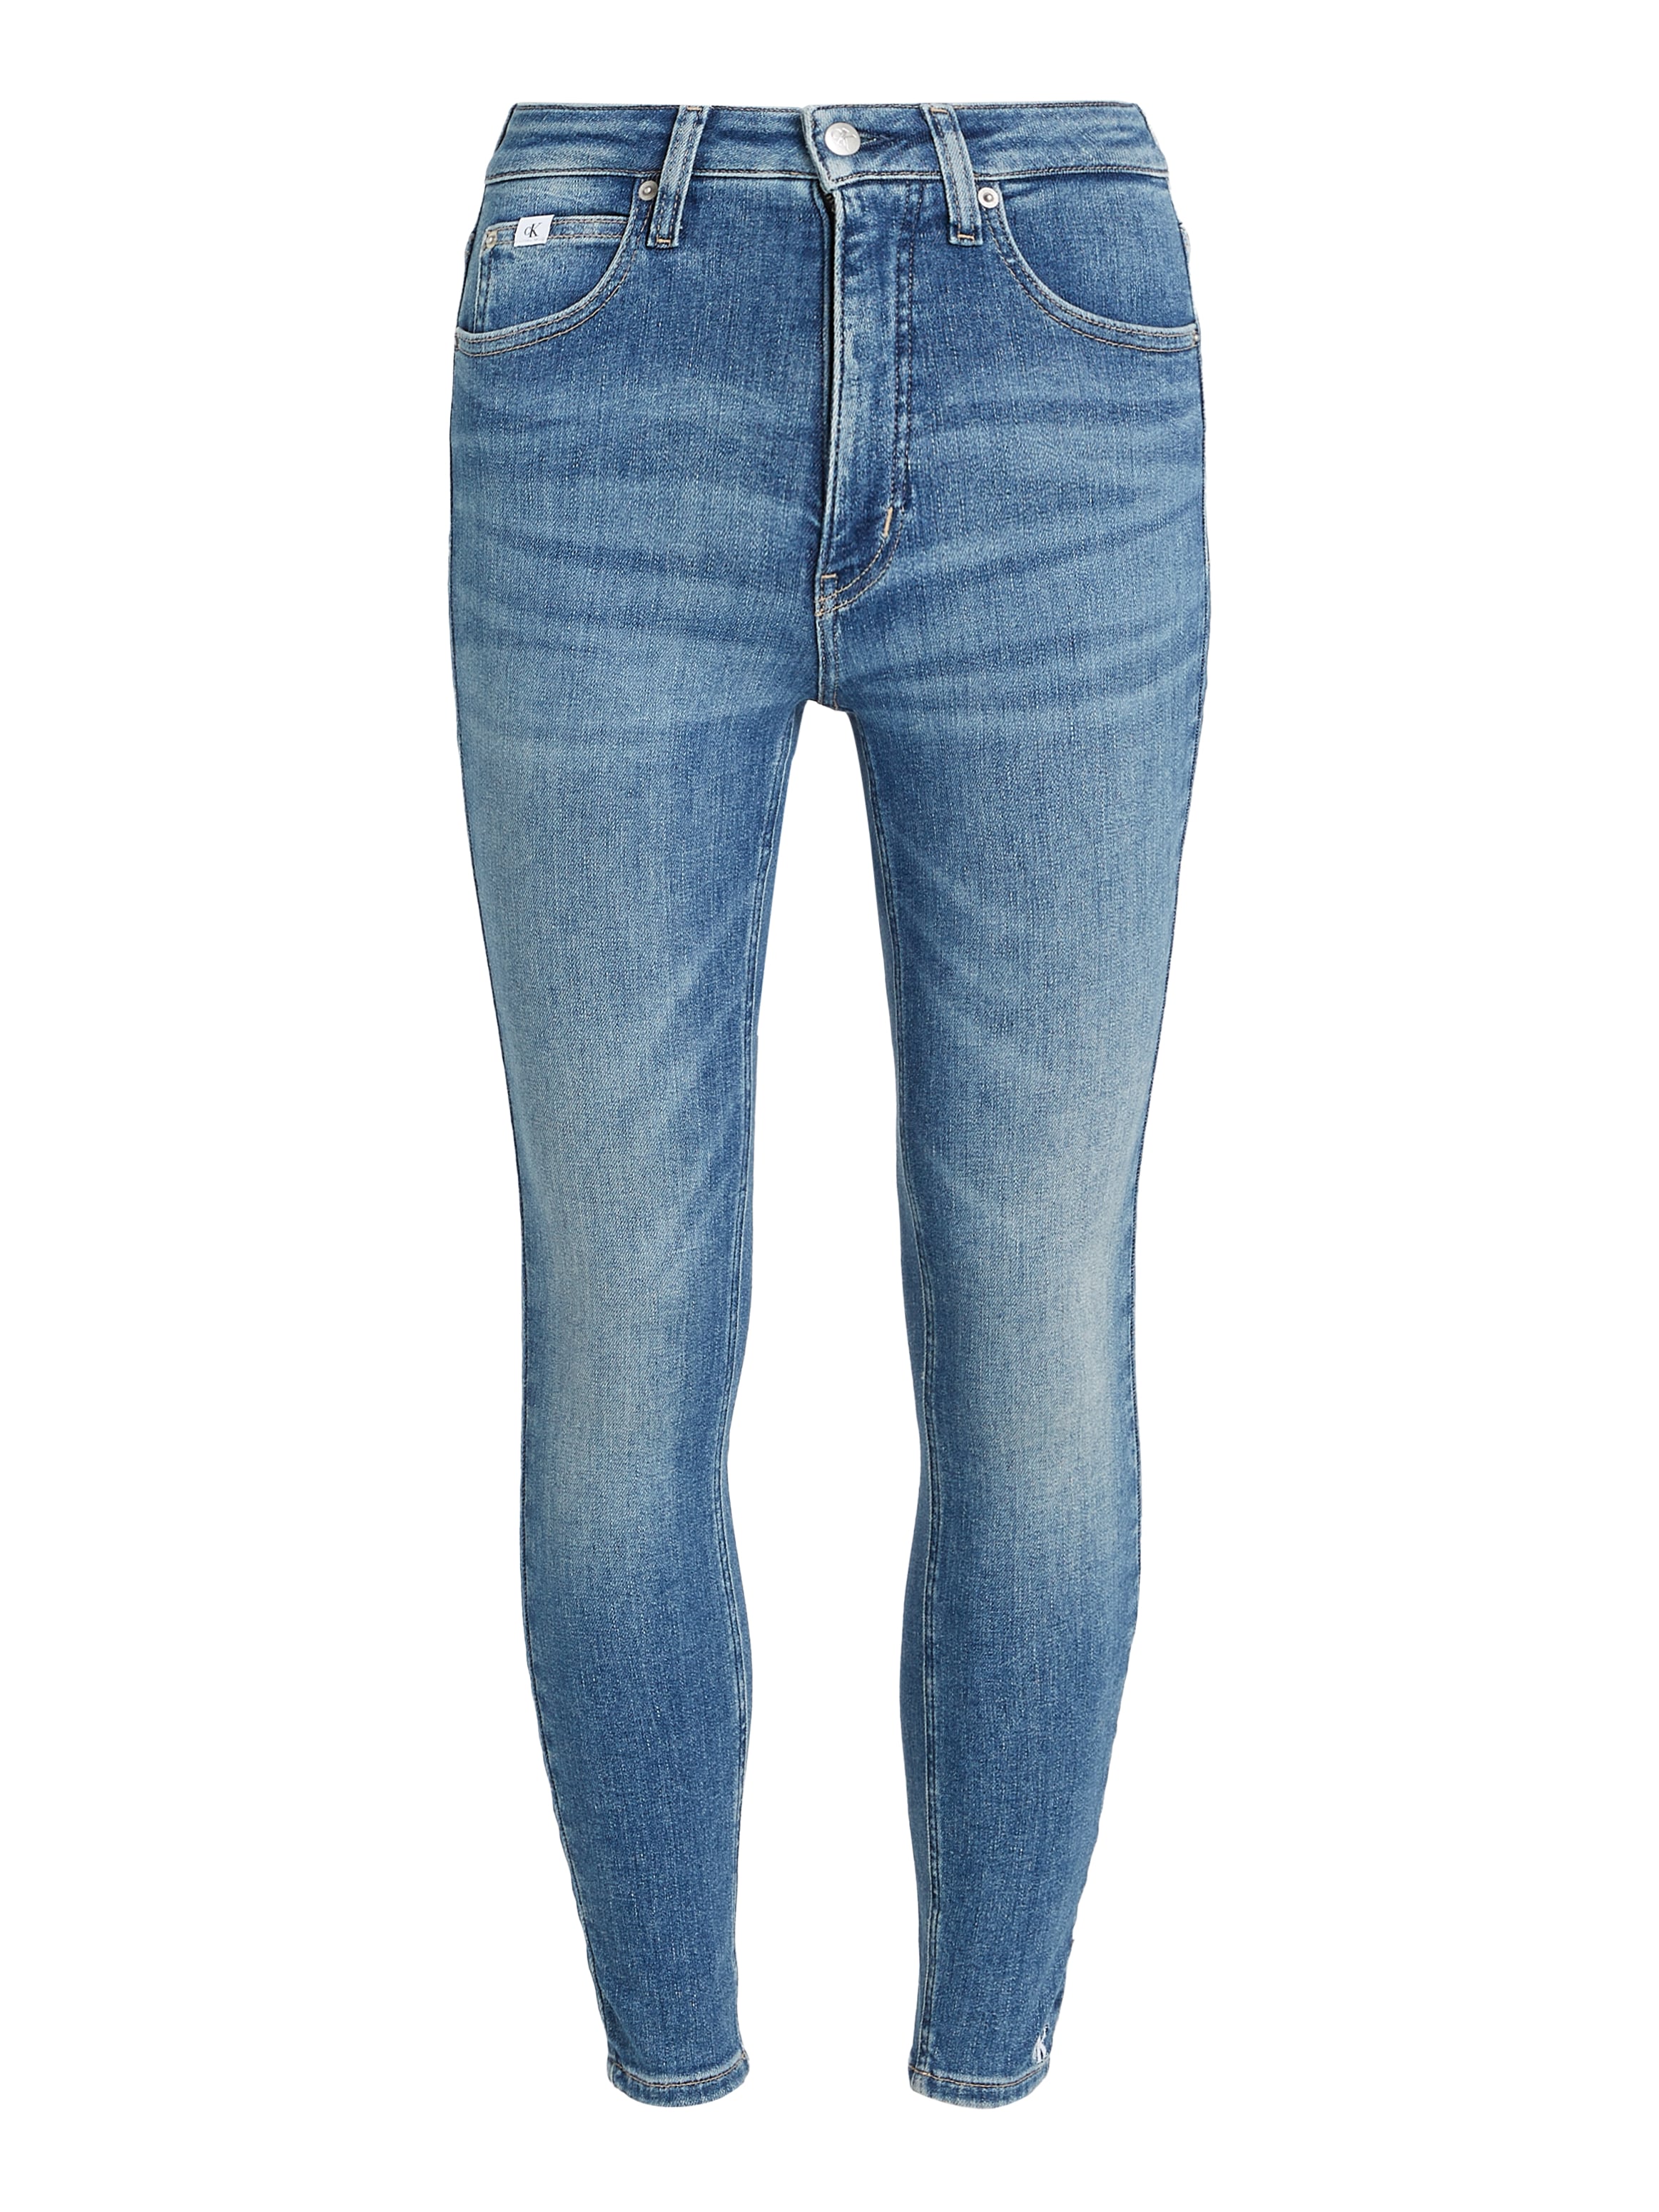 Calvin Klein Jeans Skinny-fit-Jeans »HIGH RISE SUPER SKINNY ANKLE«, im 5-Pocket-Style